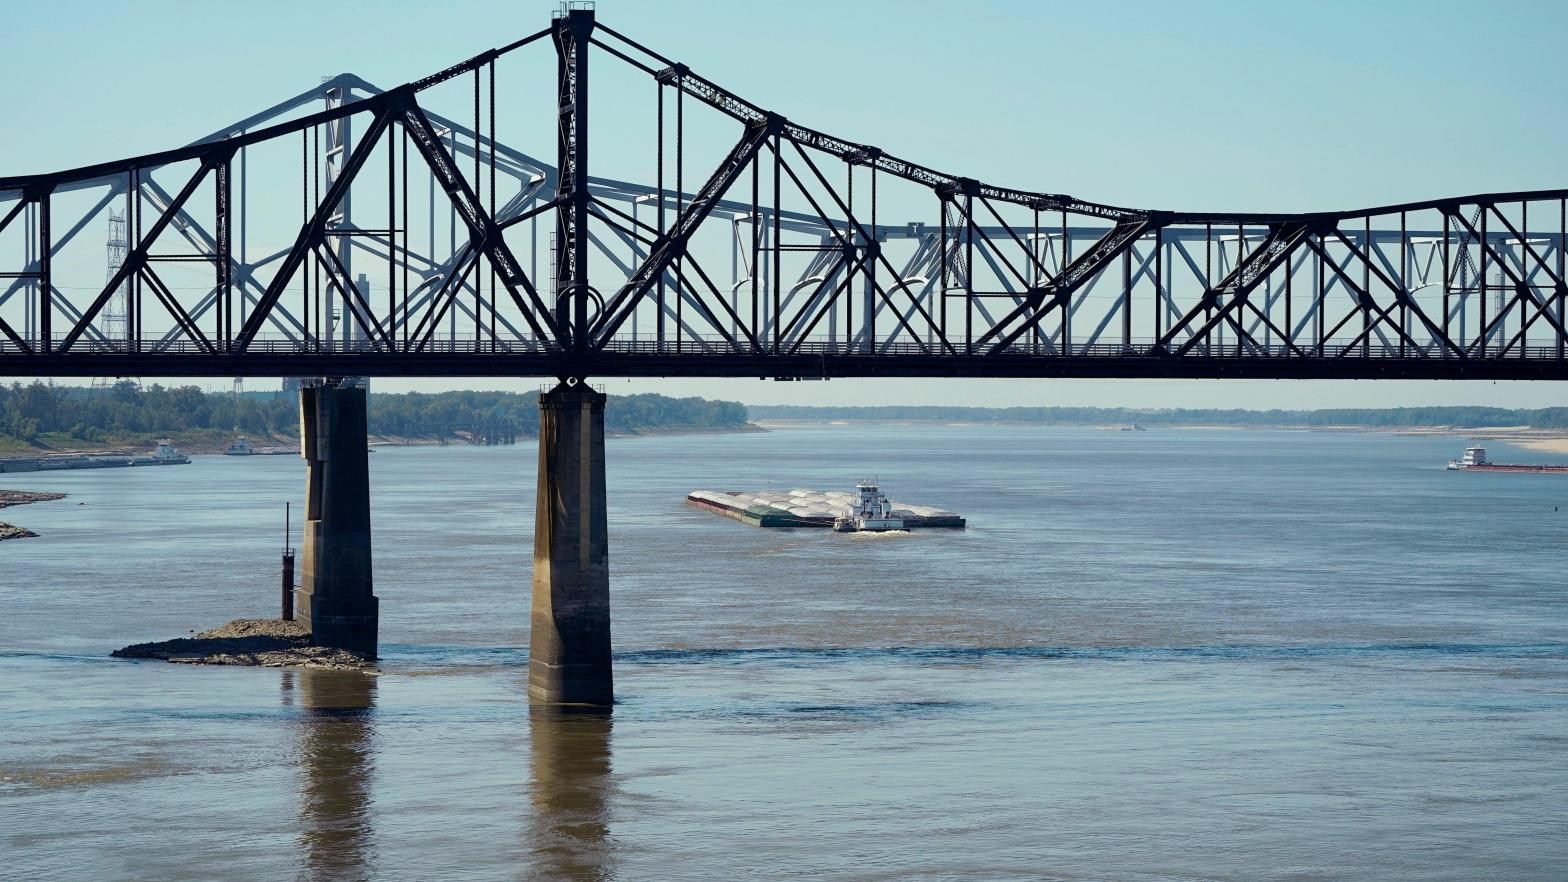 Low-water restrictions on the barge loads make for cautious navigation through the Mississippi River as evidenced by this tow passing under the Mississippi River bridges in Vicksburg, Tuesday, Oct. 11, 2022. (Photo: Rogelio V. Solis, Getty Images)